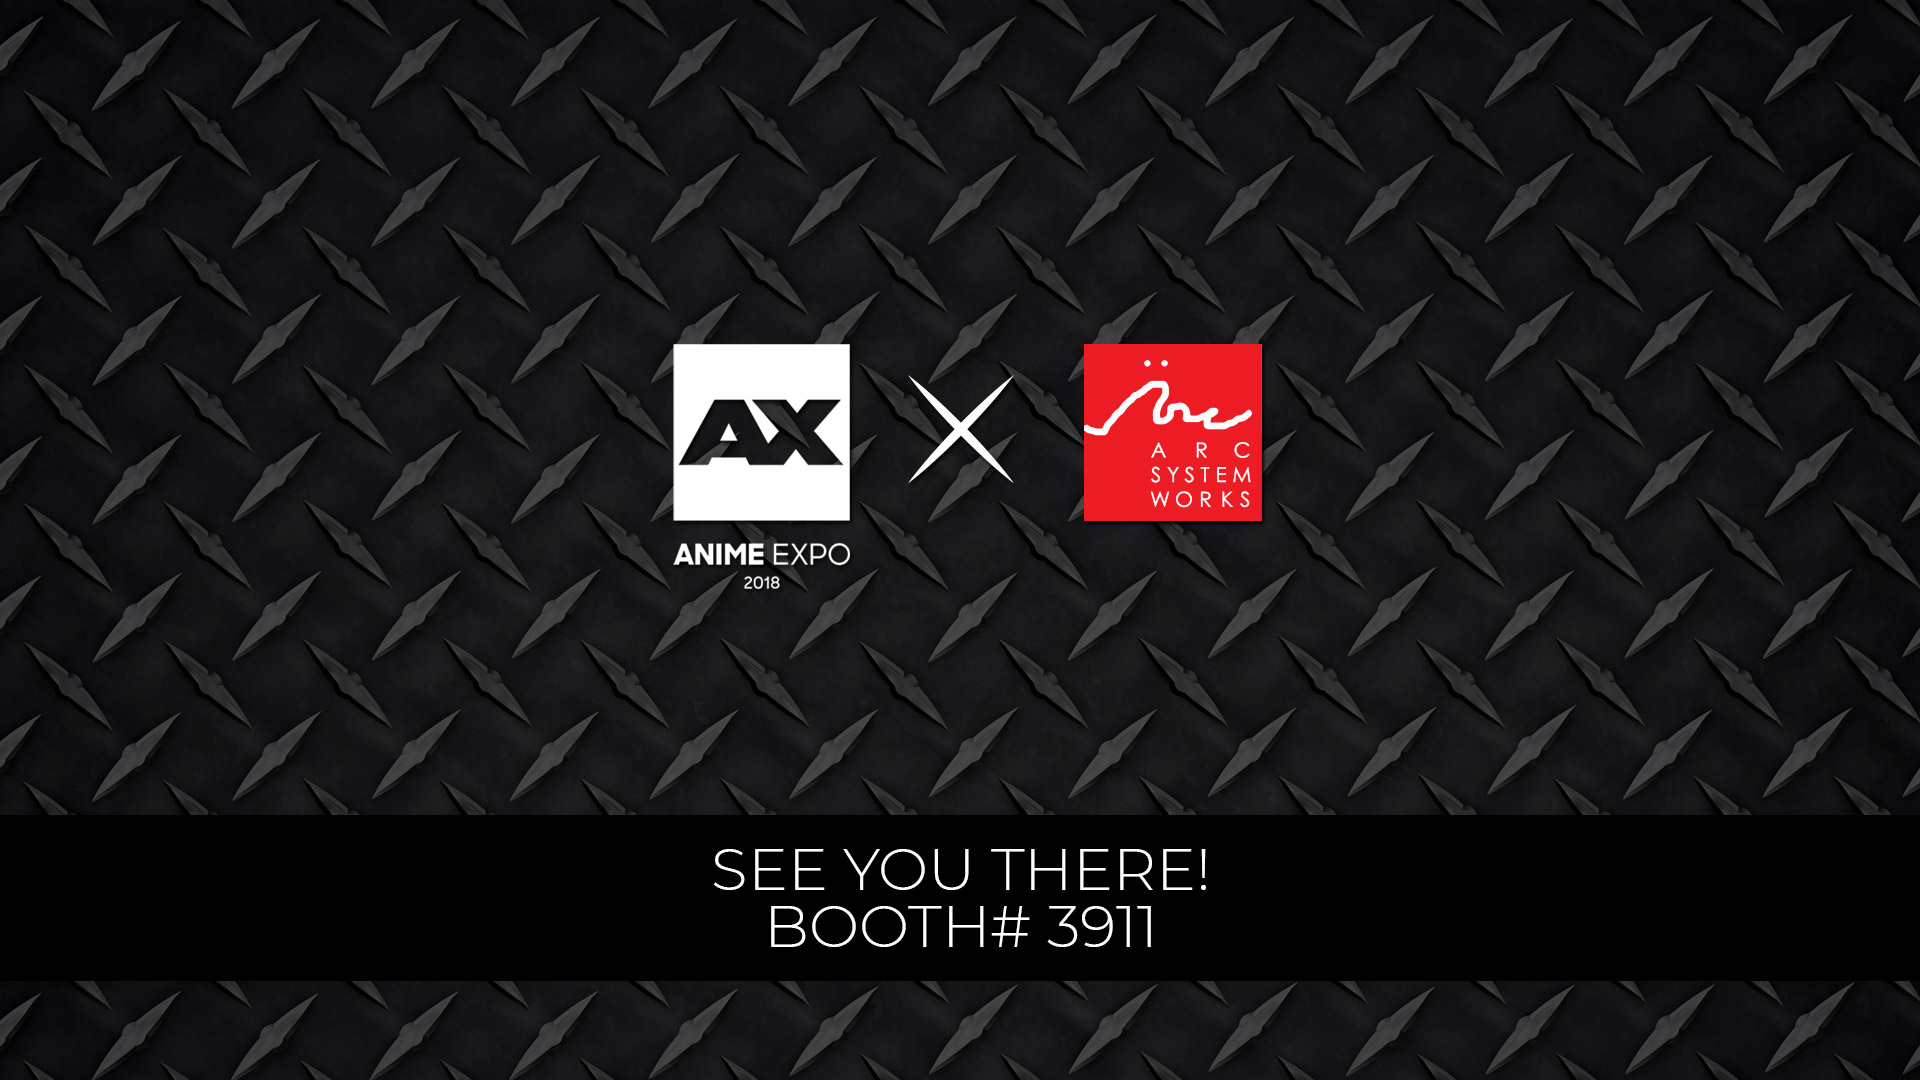 Arc System Works at Anime Expo 2018